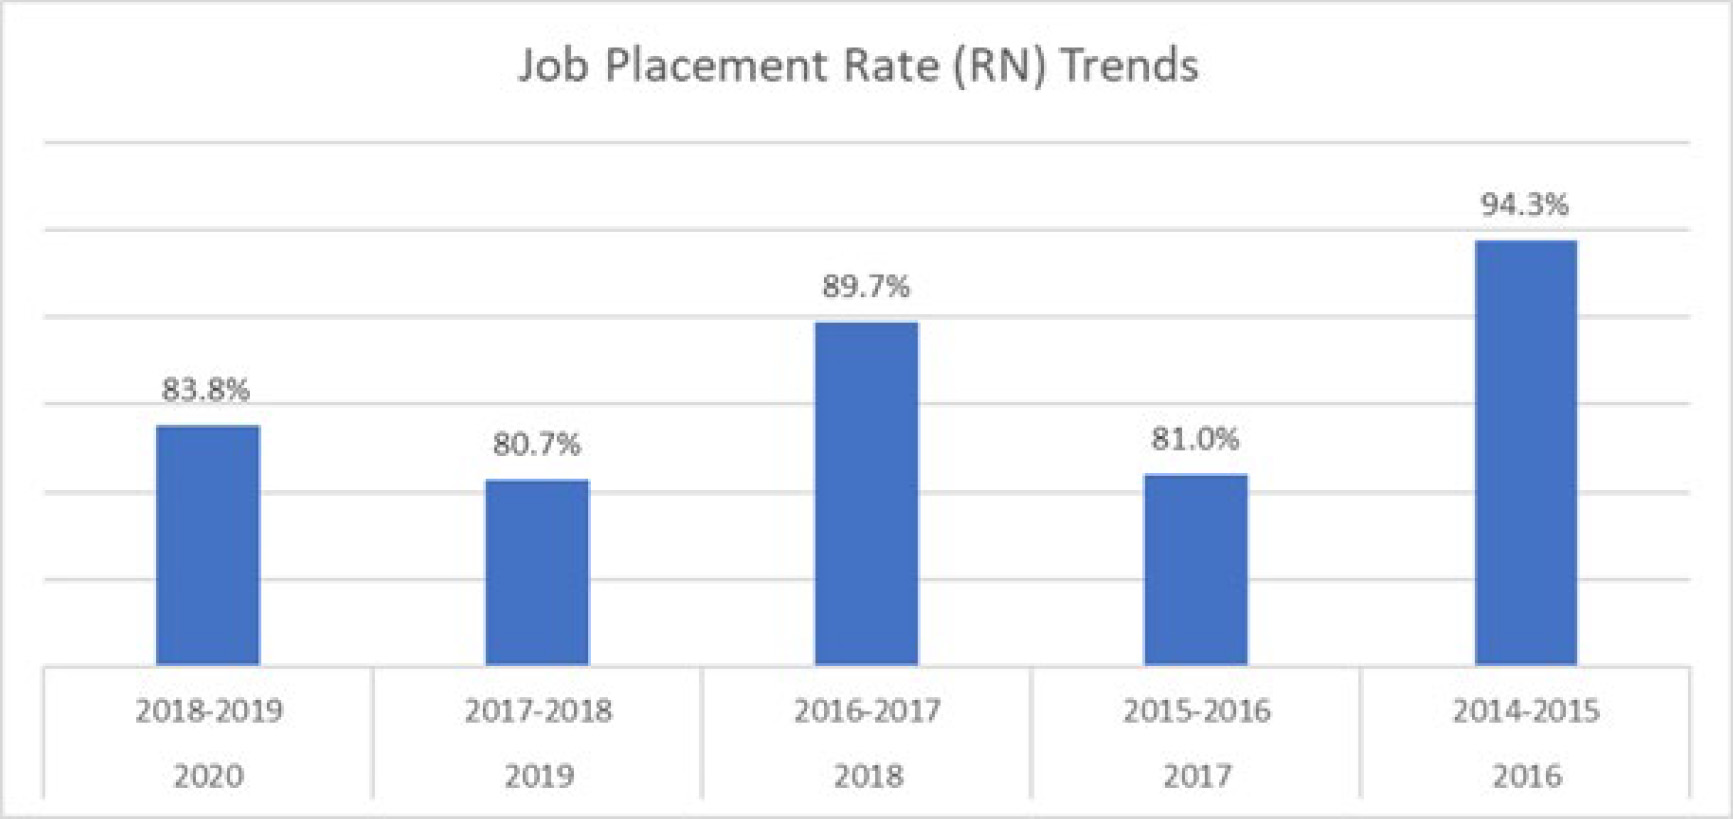 Nursing Job Placement Rates (RN): Report year 2020, July to June 2018-2019, 38 grads, 37 grads available, 31 on job, 83.8% job placement rate (RN) Report year 2019, July to June 2017-2018, 58 grads, 57 grads available, 46 on job, 80.7% job placement rate (RN) Report year 2018, July to June 2016-2017, 68 grads, 68 grads available, 61 on job, 89.7% job placement rate (RN) Report year 2017, July to June 2015-2016, 64 grads, 63 grads available, 51 on job, 81% job placement rate (RN) Report year 2016, July to June 2014-2015, 54 grads, 53 grads available, 50 on job, 94.3% job placement rate (RN)